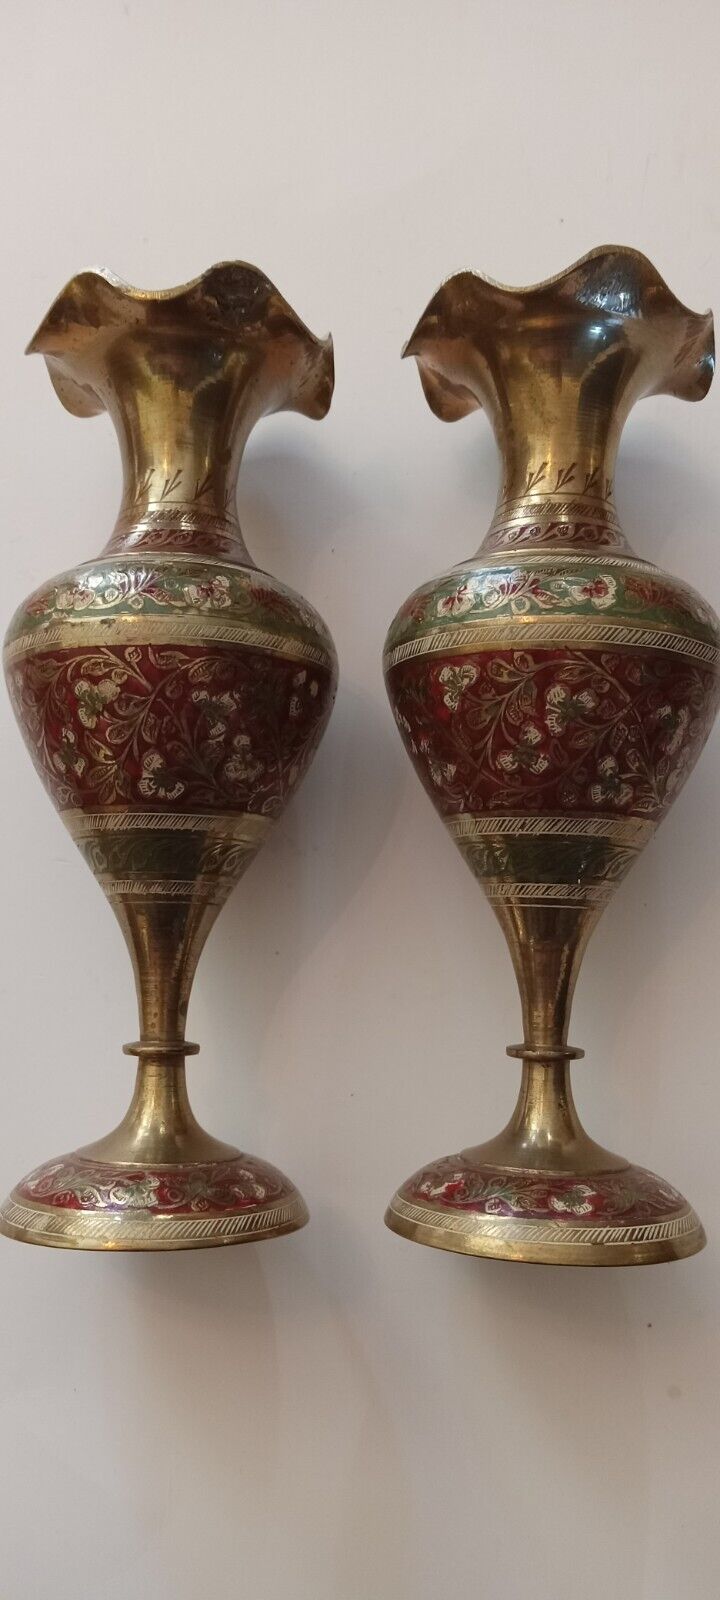 Vintage Hand Painted And Engraved Brass Bud Vase From British India 8 in tall